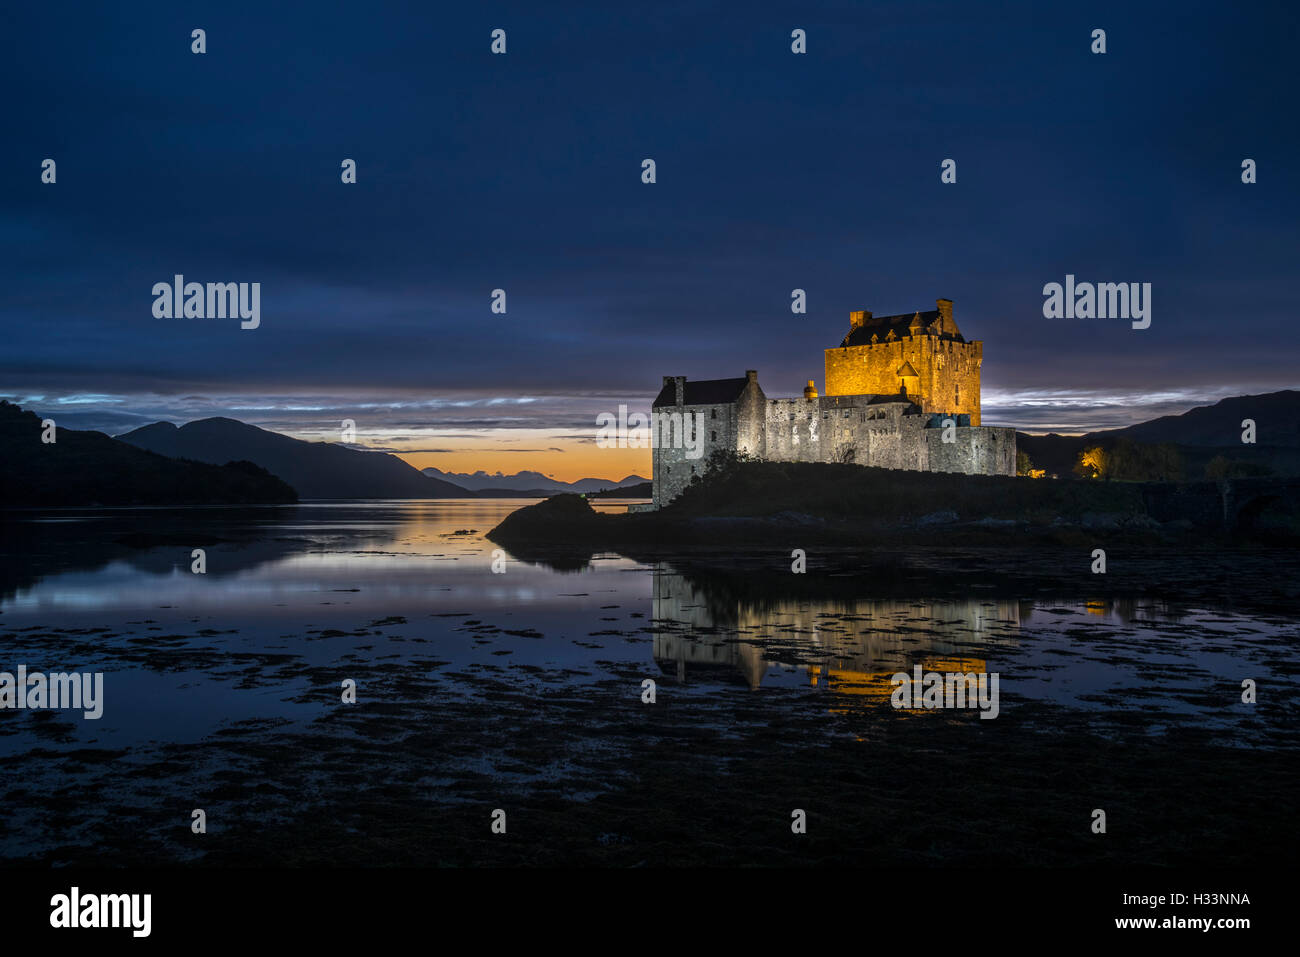 Illuminated Eilean Donan Castle at night in Loch Duich, Ross and Cromarty, Western Highlands of Scotland, UK Stock Photo